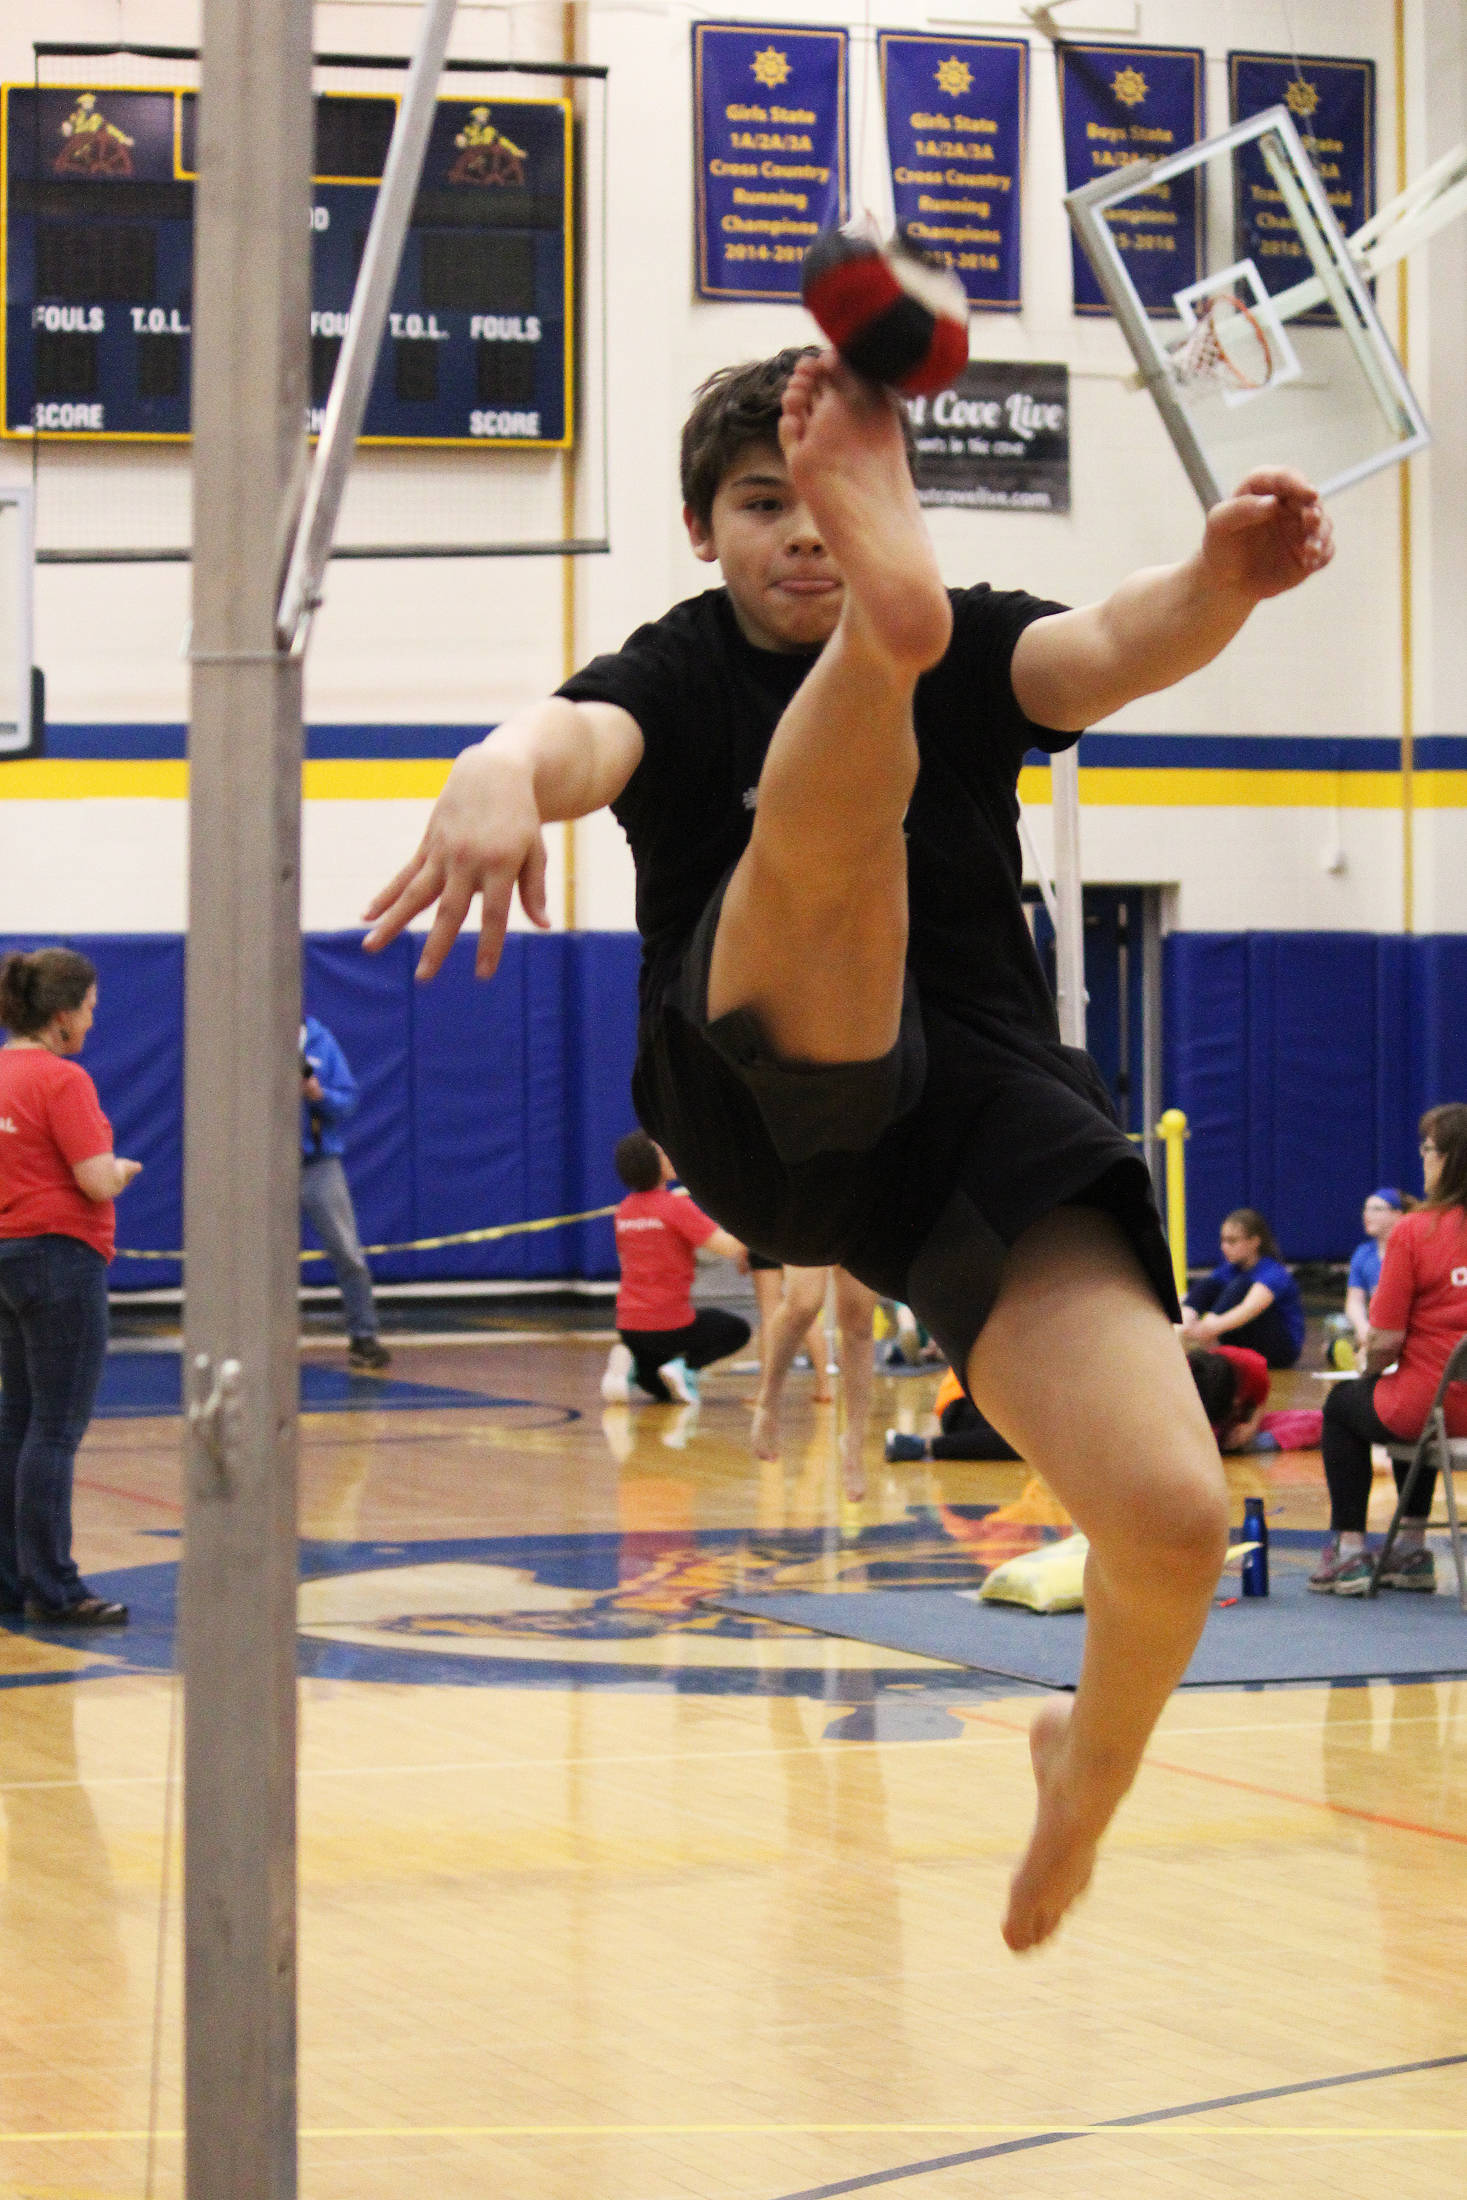 William Wilson, 13, performs the one-foot high kick Saturday, March 30, 2019 during the Kachemak Bay Traditional Games held at Homer High School in Homer, Alaska. (Photo by Megan Pacer/Homer News)